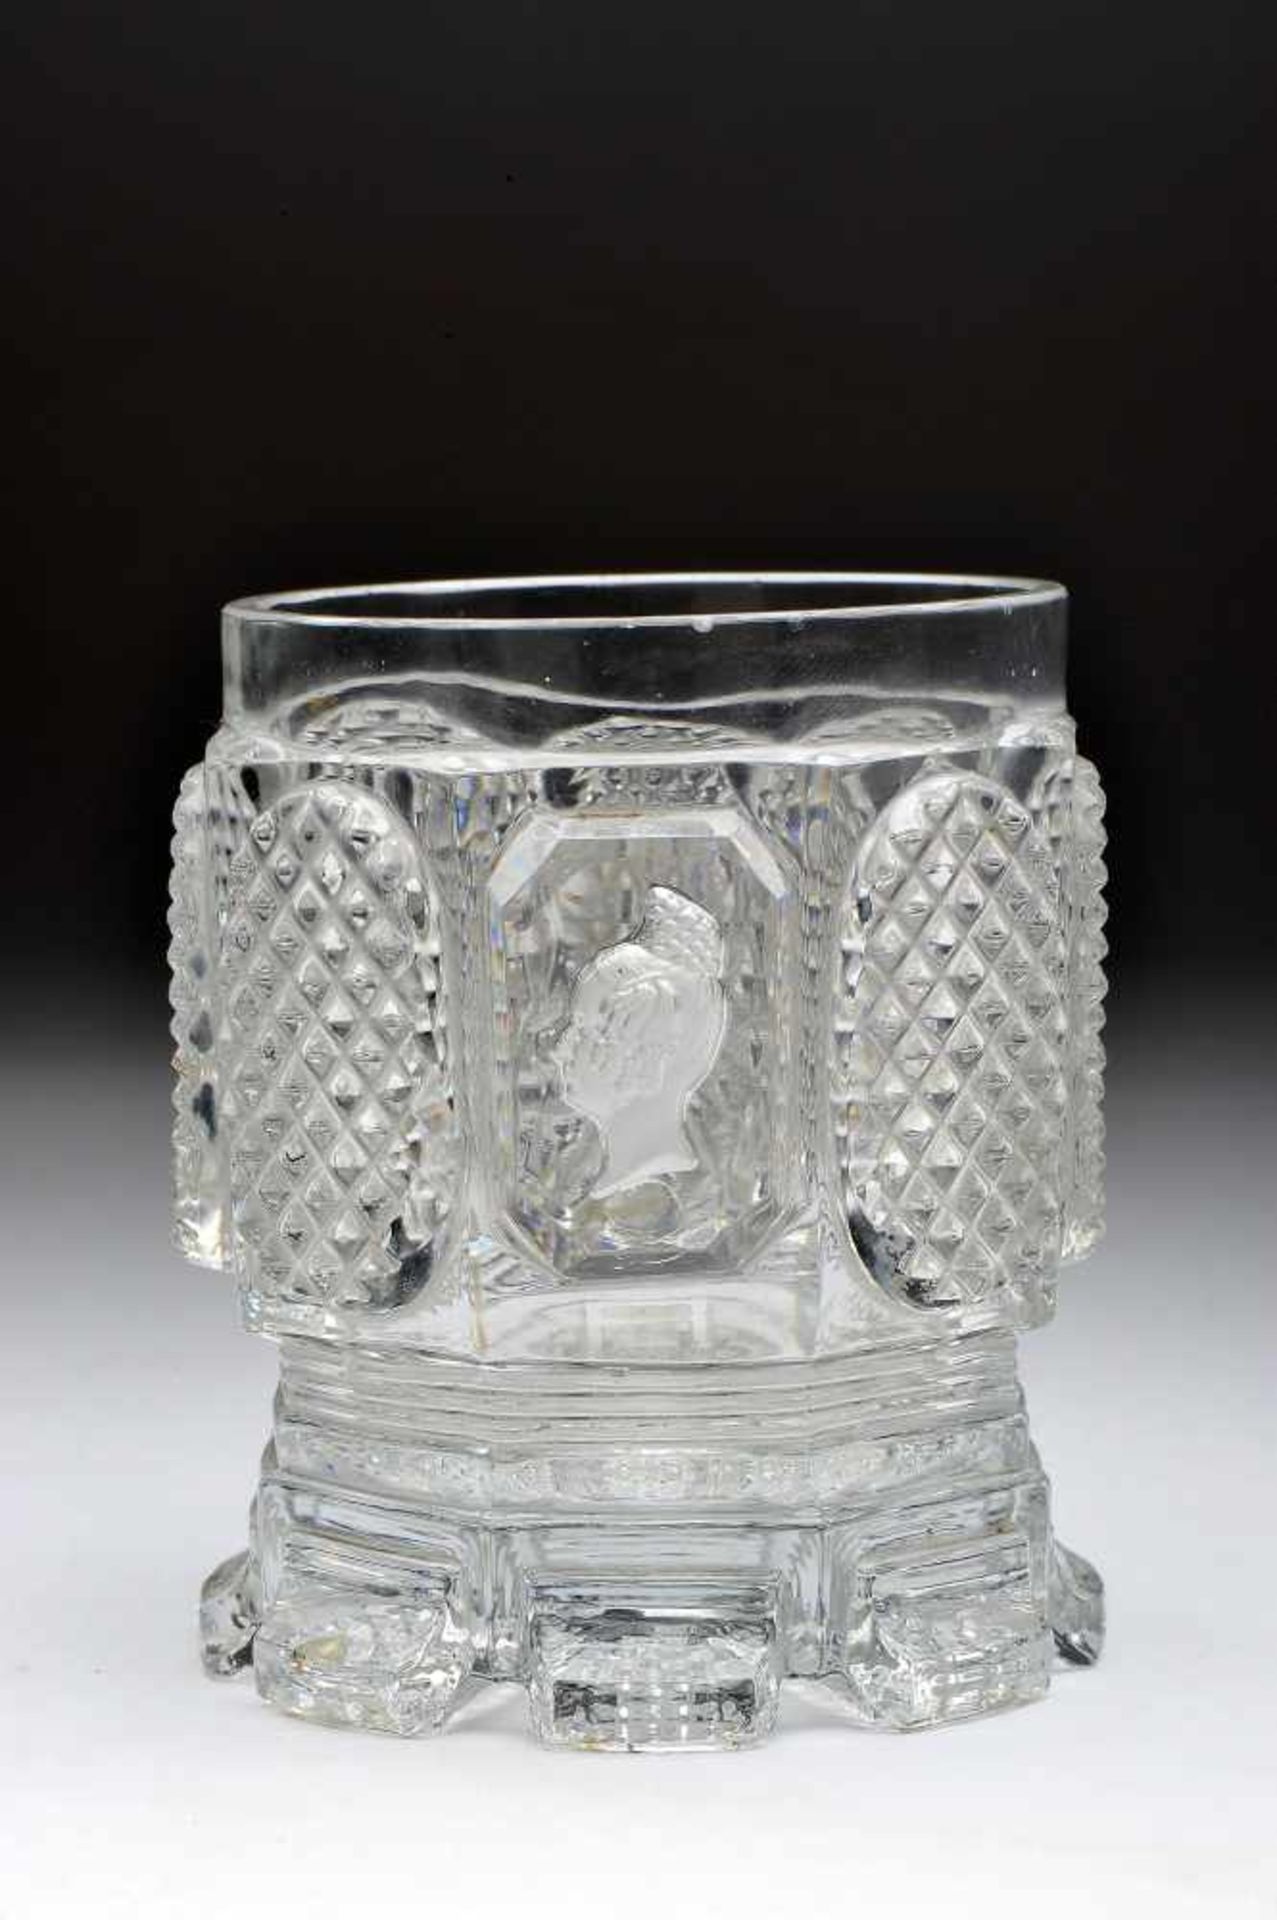 A Glass, moulded crystal by Vista Alegre Manufactory, cut decoration "Diamond tip" with cameo "